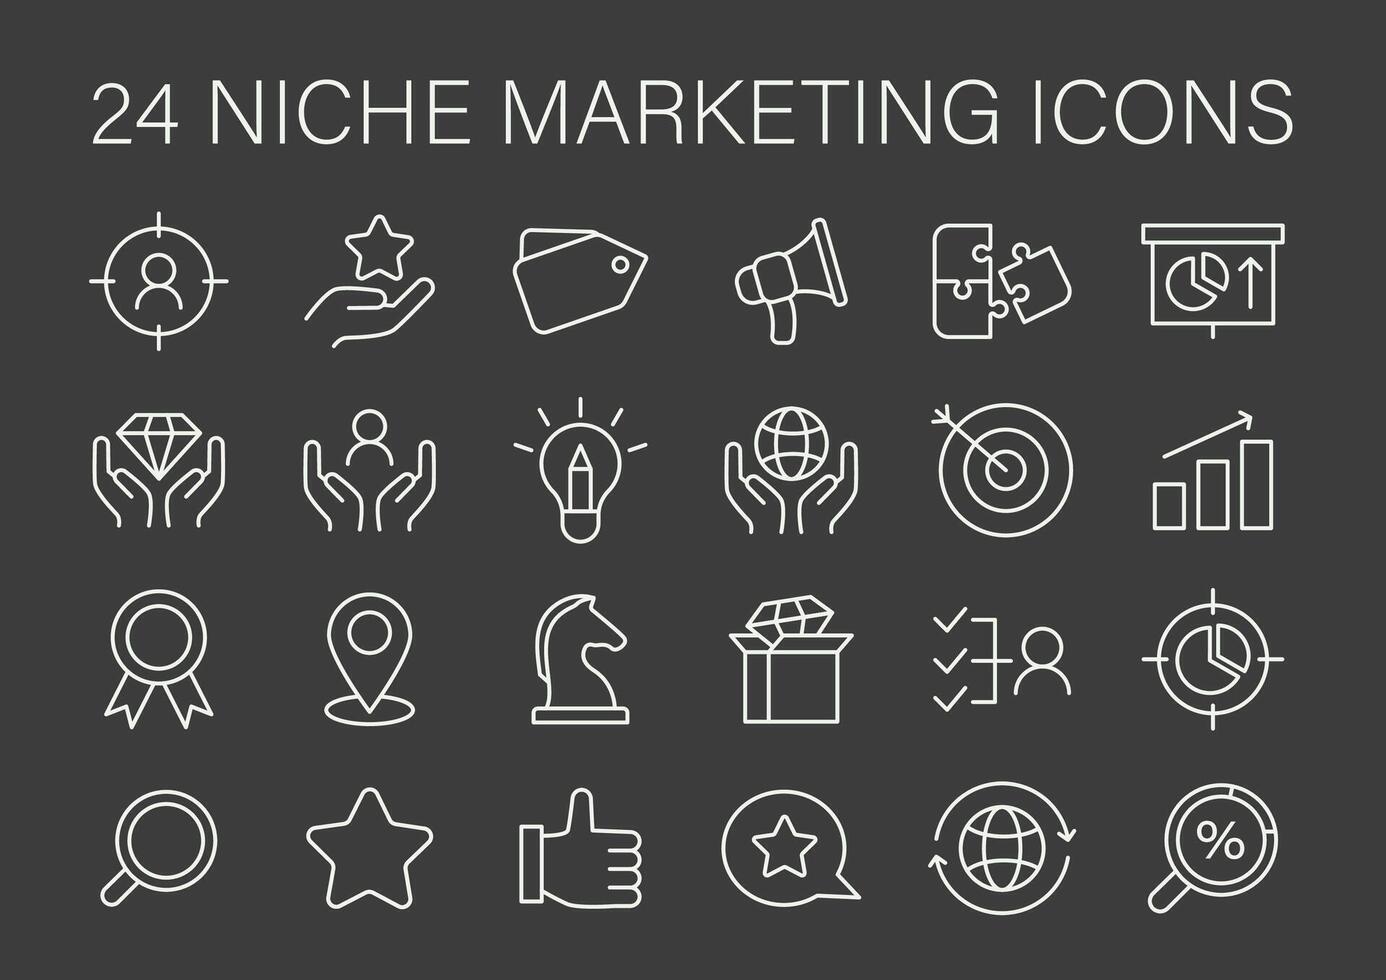 Niche Marketing set. Tailored strategy symbols for targeted audience engagement. vector